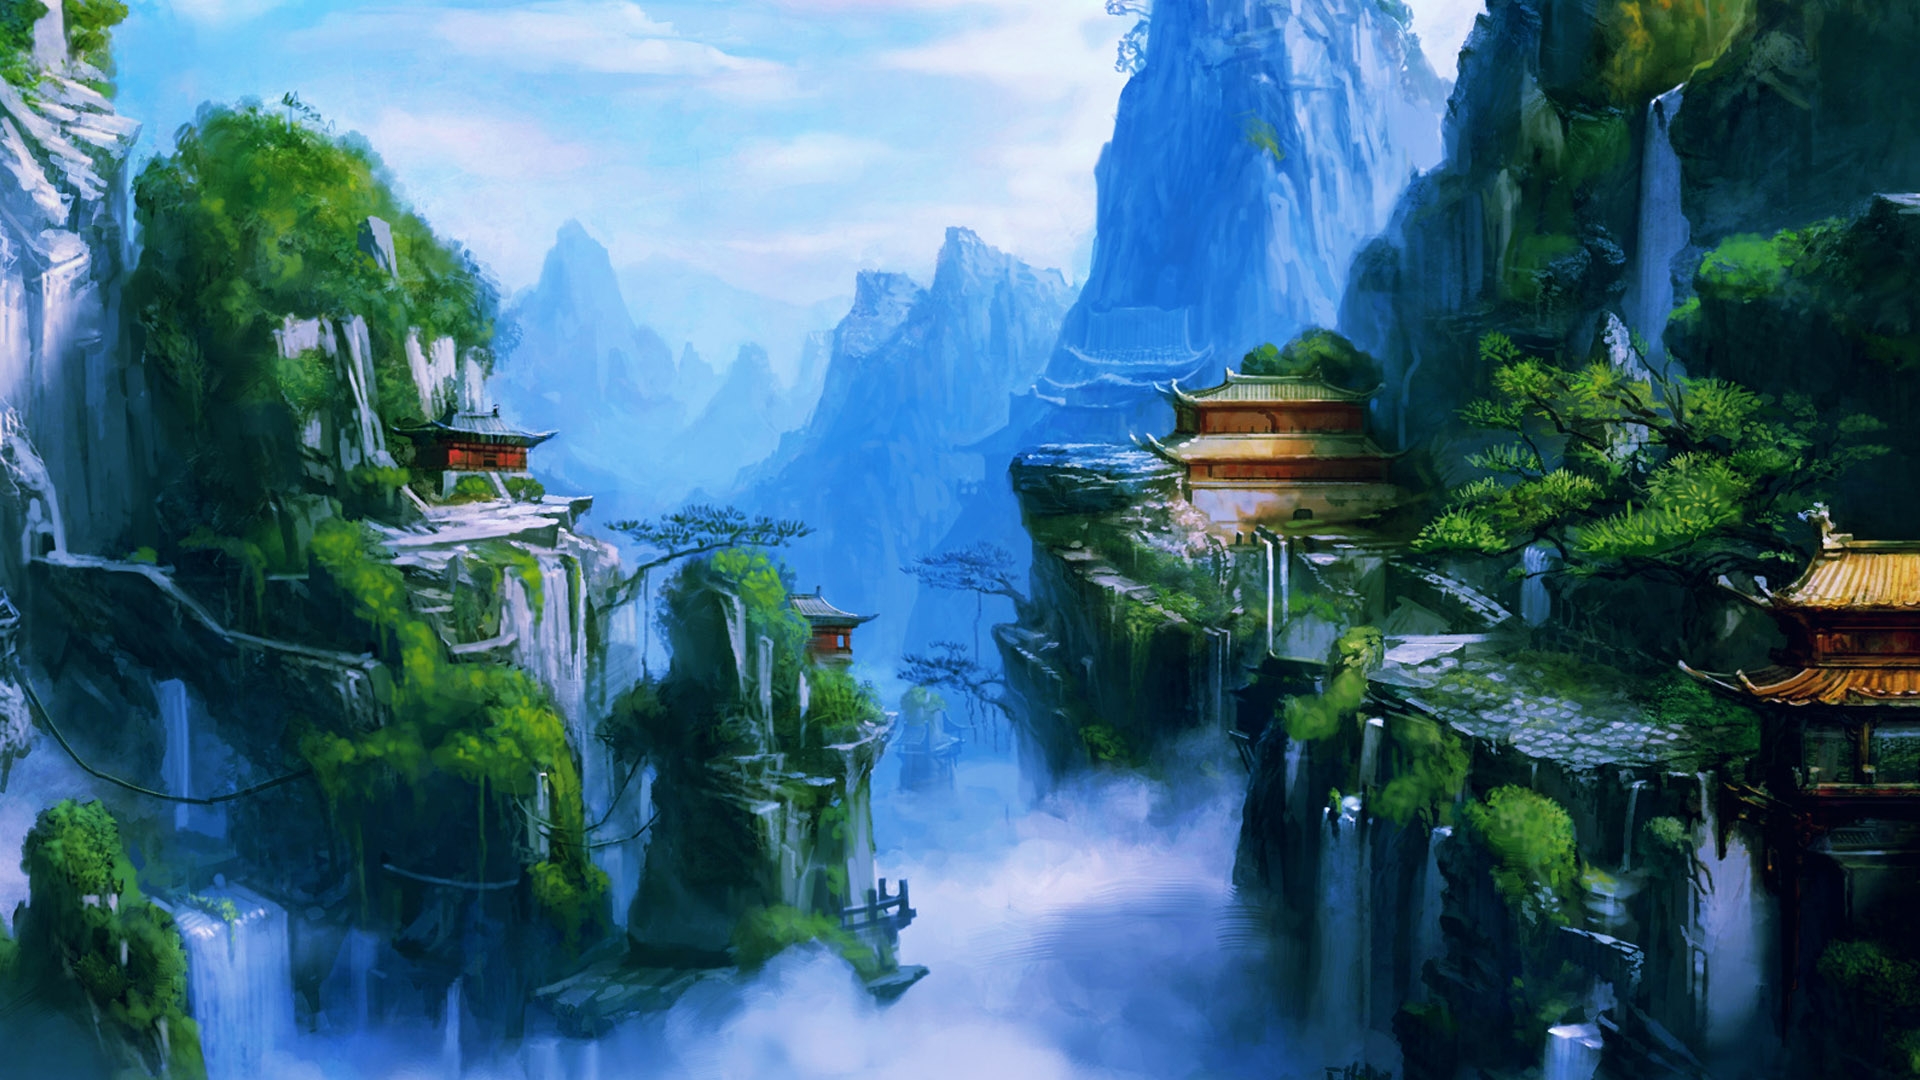 Wallpaperuniversity 3d Fantasy Nature And Sci Fi Scenery